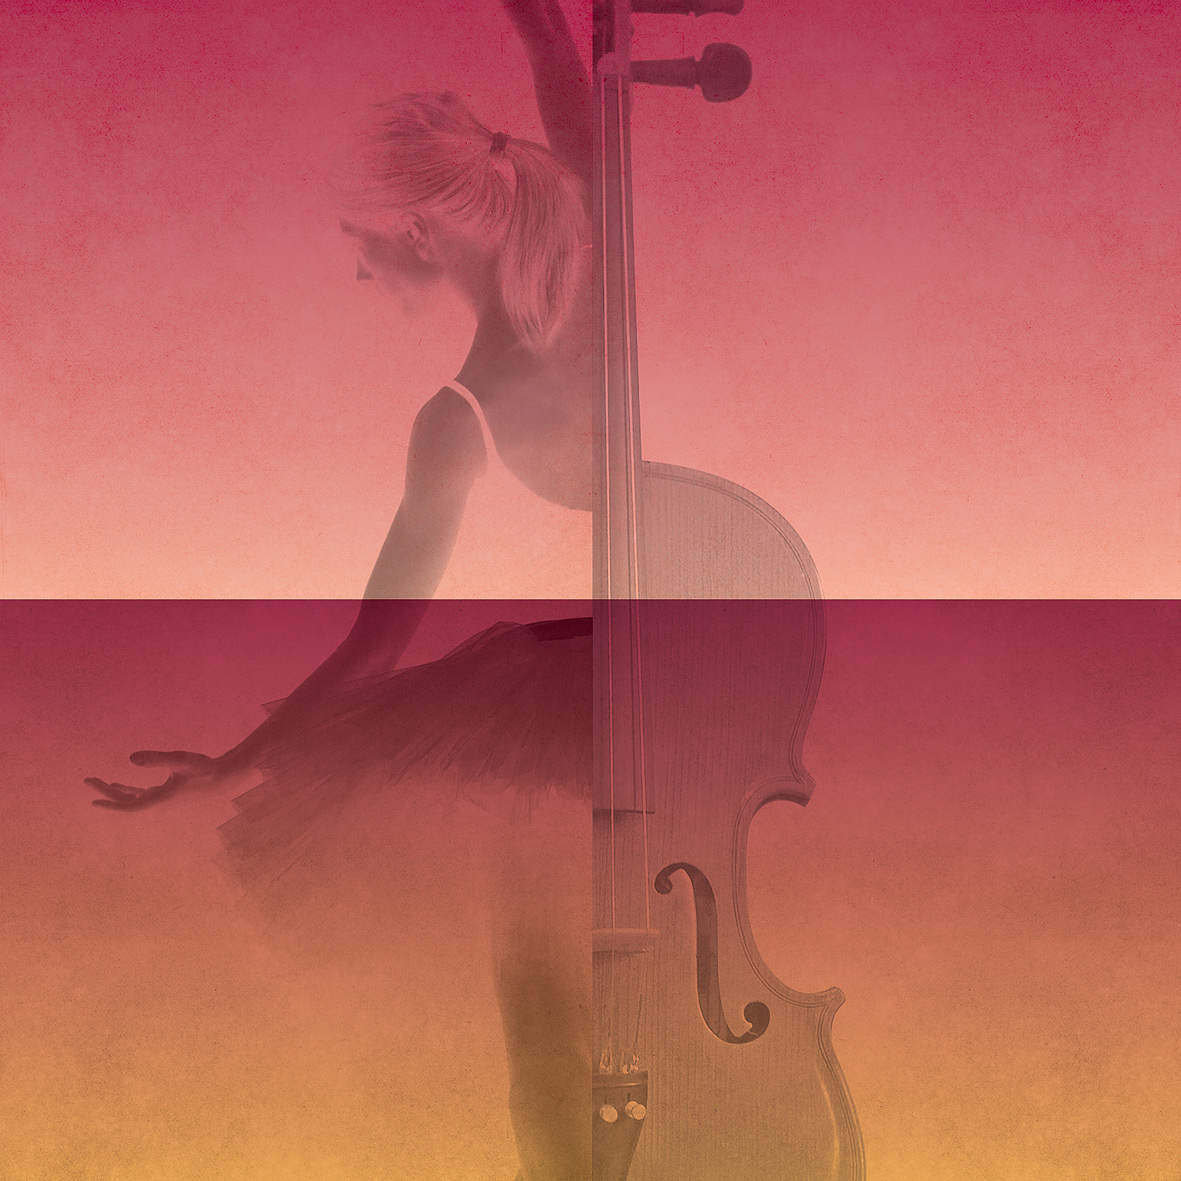 ballerina image with cello from concert poster